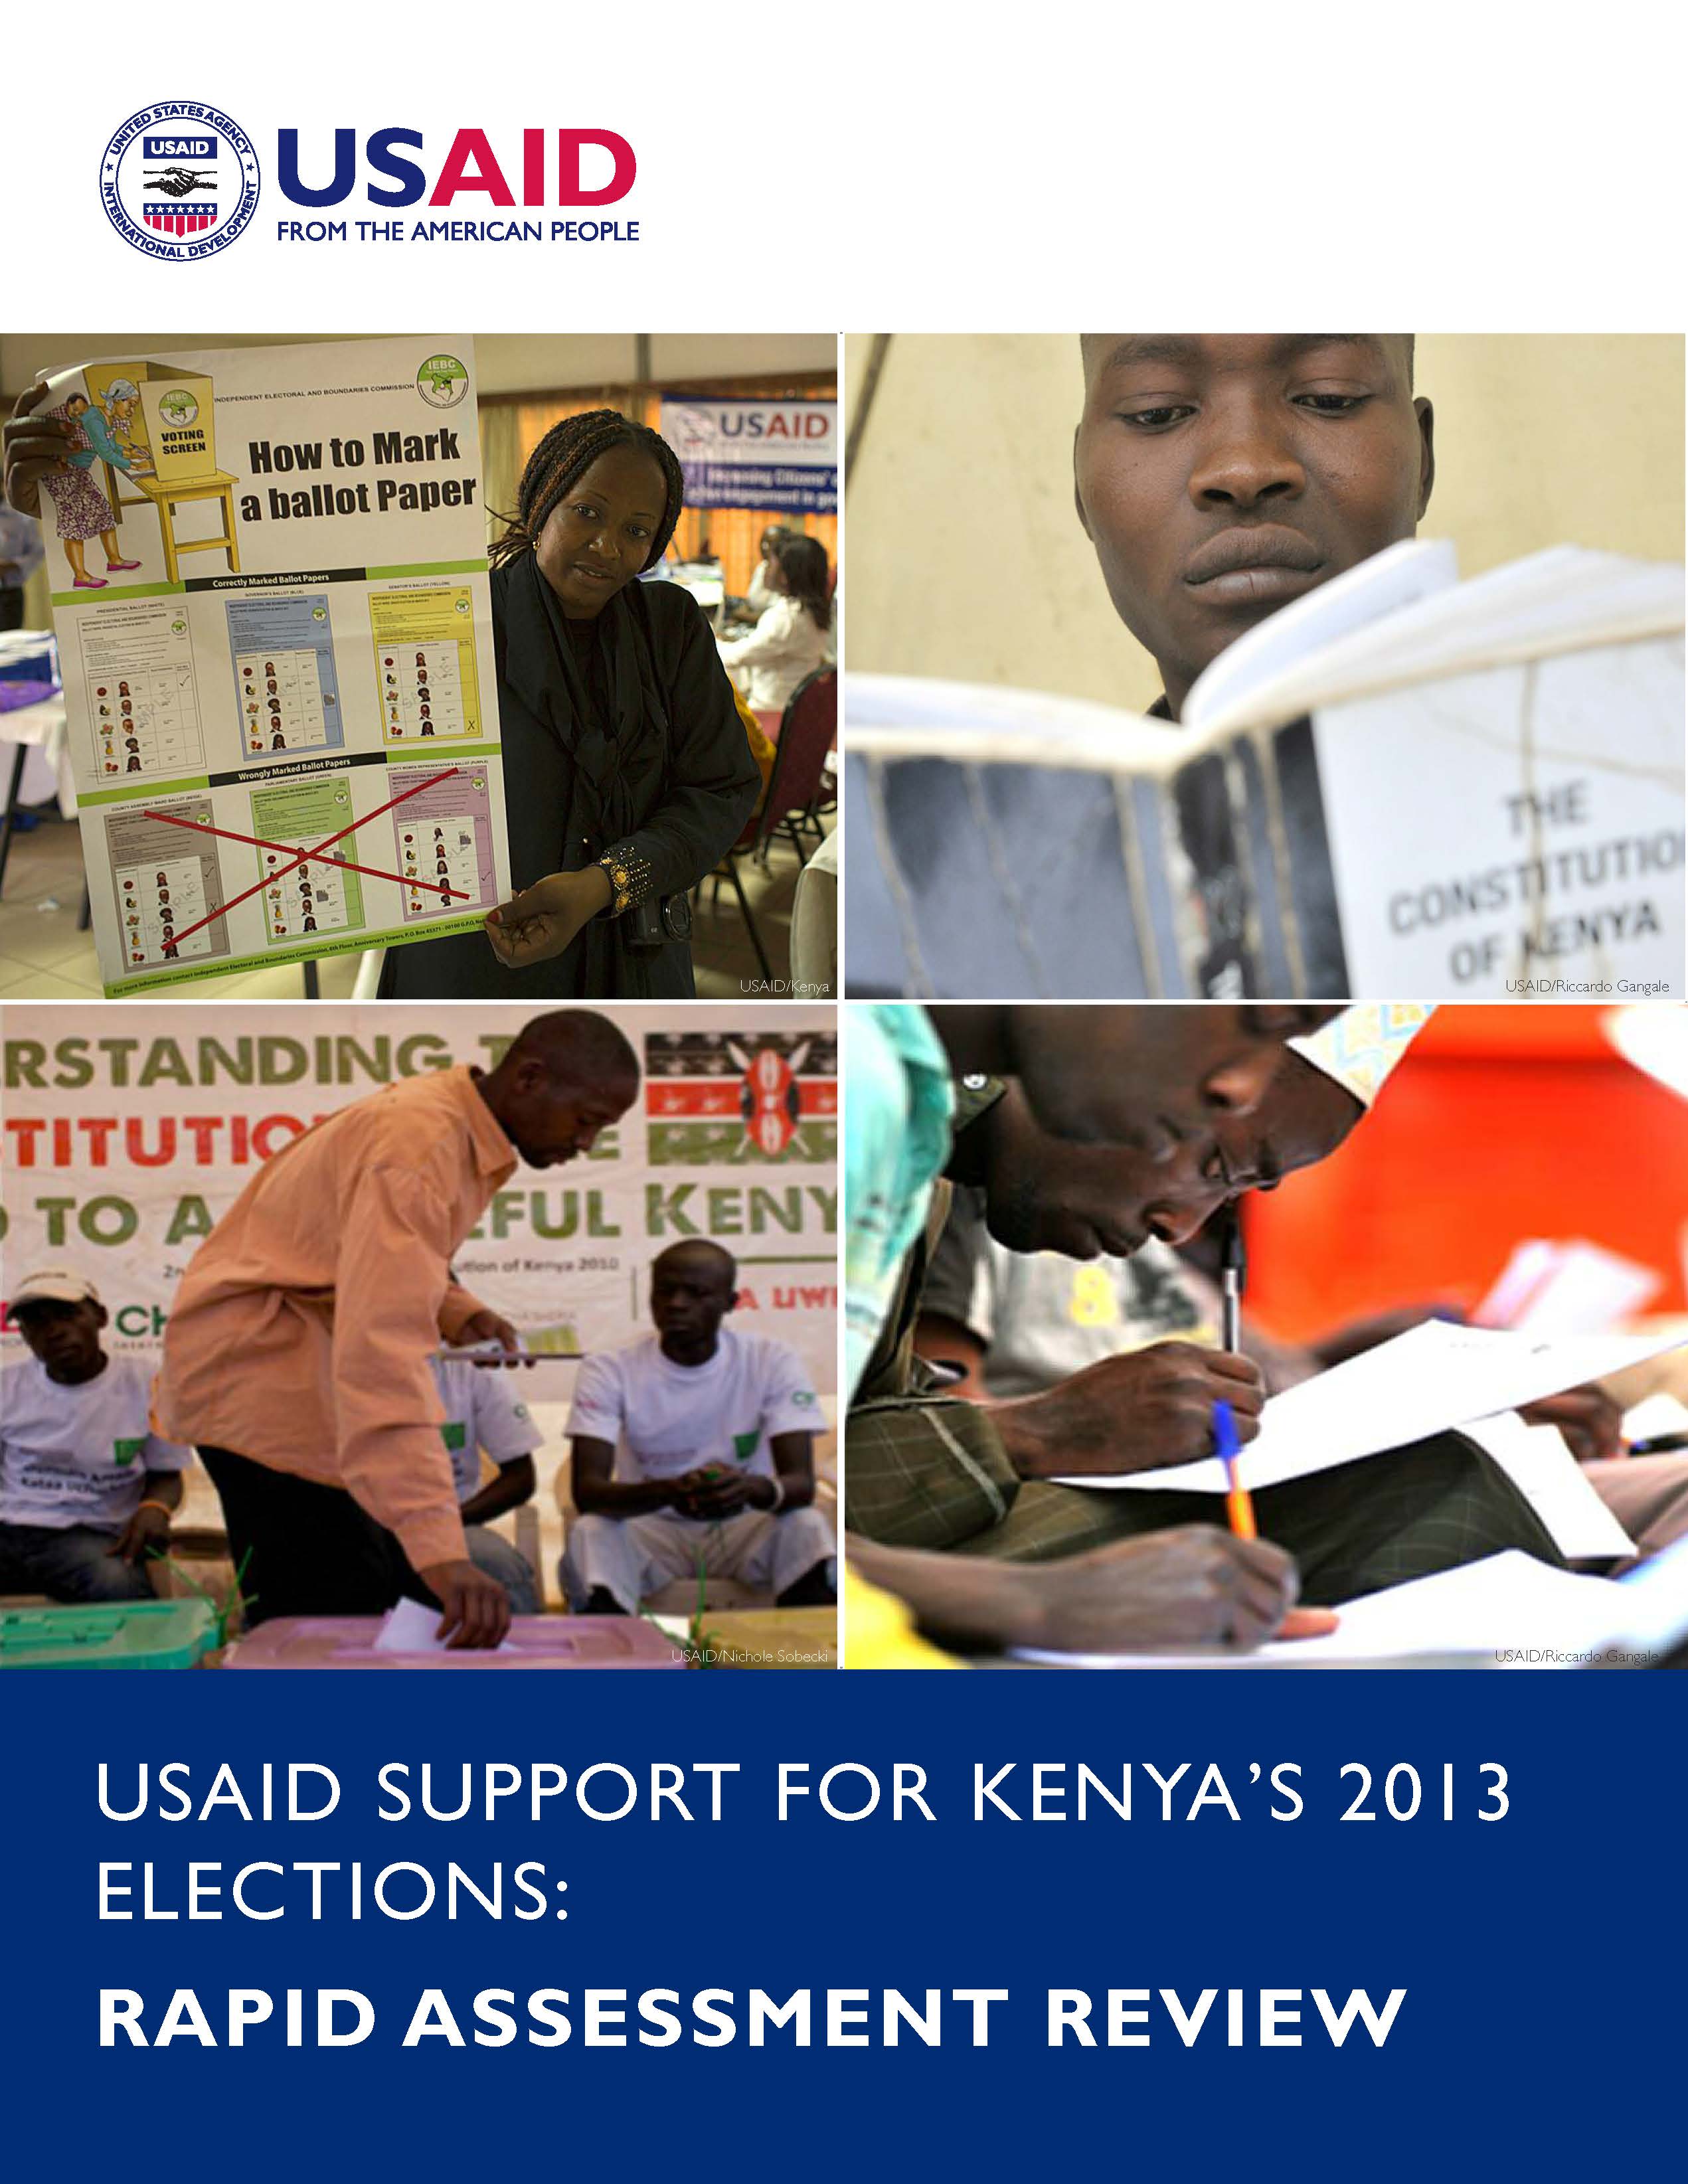 USAID Support for Kenya's 2013 Elections: Rapid Assessment Review